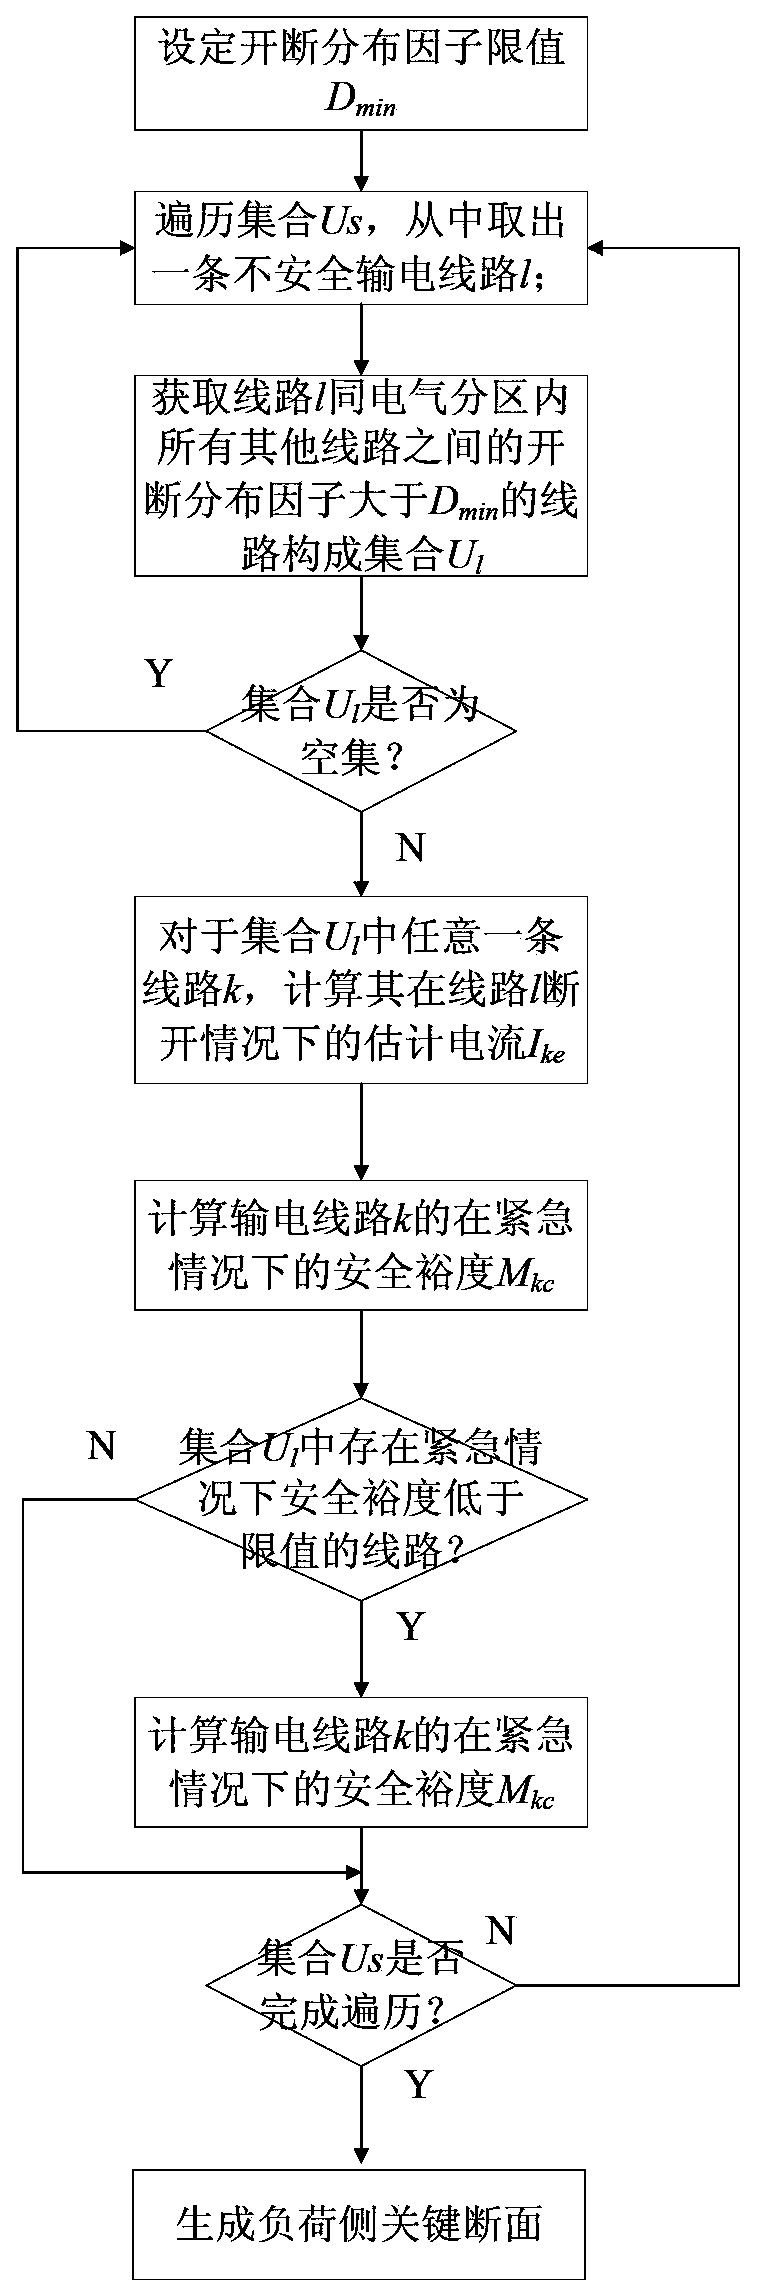 Method for automatically selecting key sections on load side of electrical partition of power grid